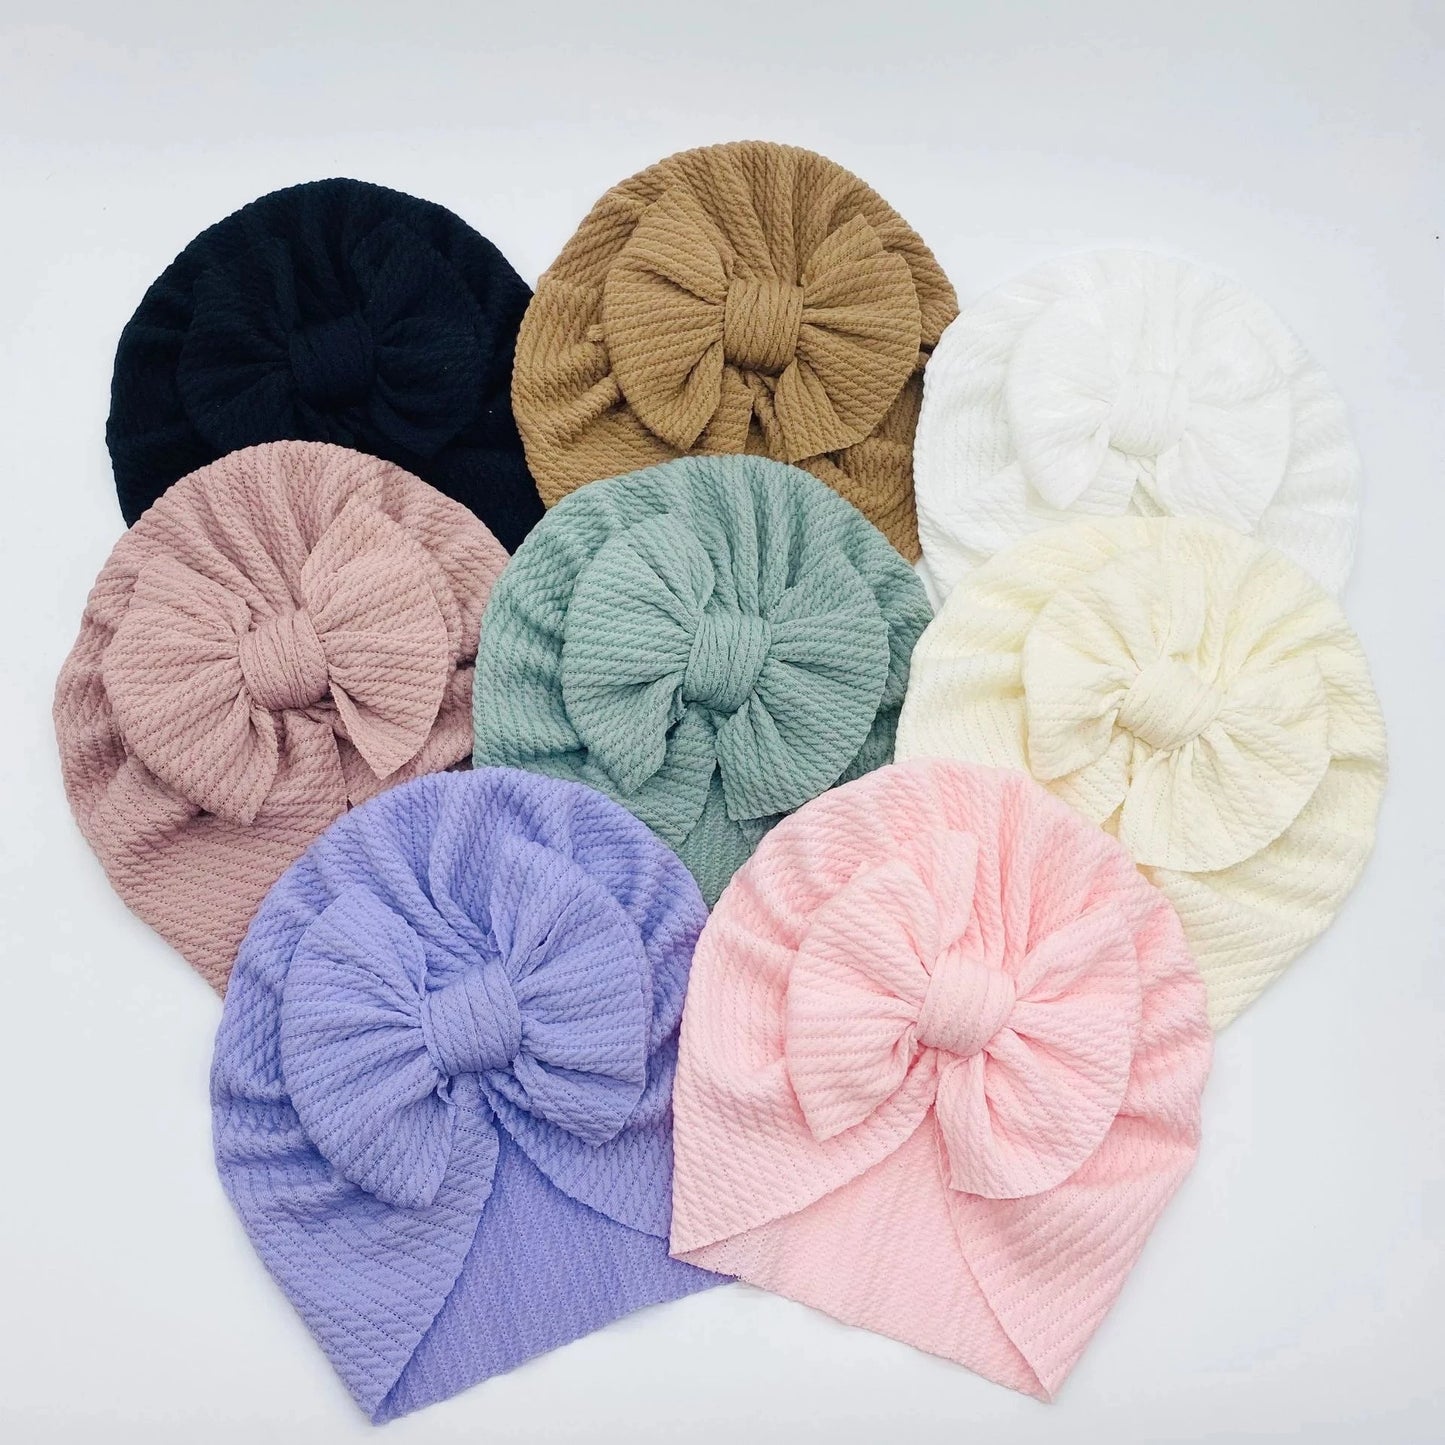 Knotted Cotton Baby Turban